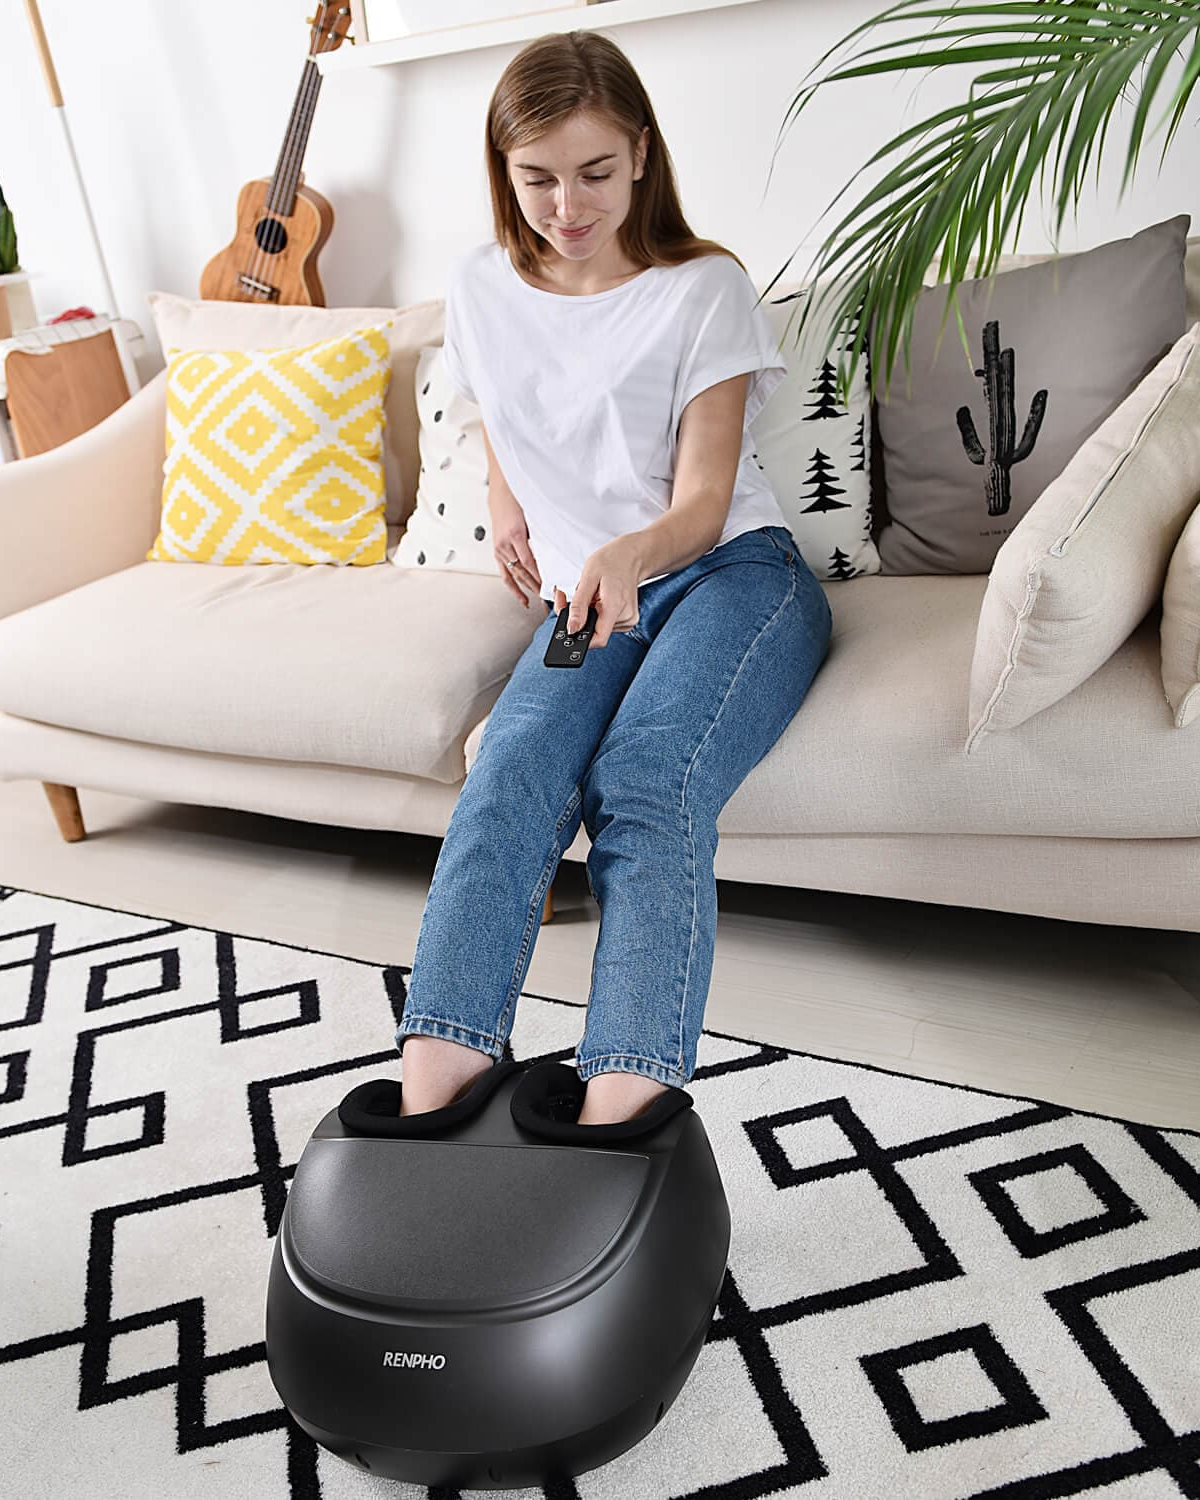 A woman in a white shirt and blue jeans uses a remote control to operate a Renpho EU Shiatsu Foot Massager Premium, relaxing her body with its deep kneading foot massage. She is sitting on a beige couch with patterned cushions, including one in yellow and white. There is a black and white rug on the floor and a cactus decoration on the couch. A guitar is seen in the background.